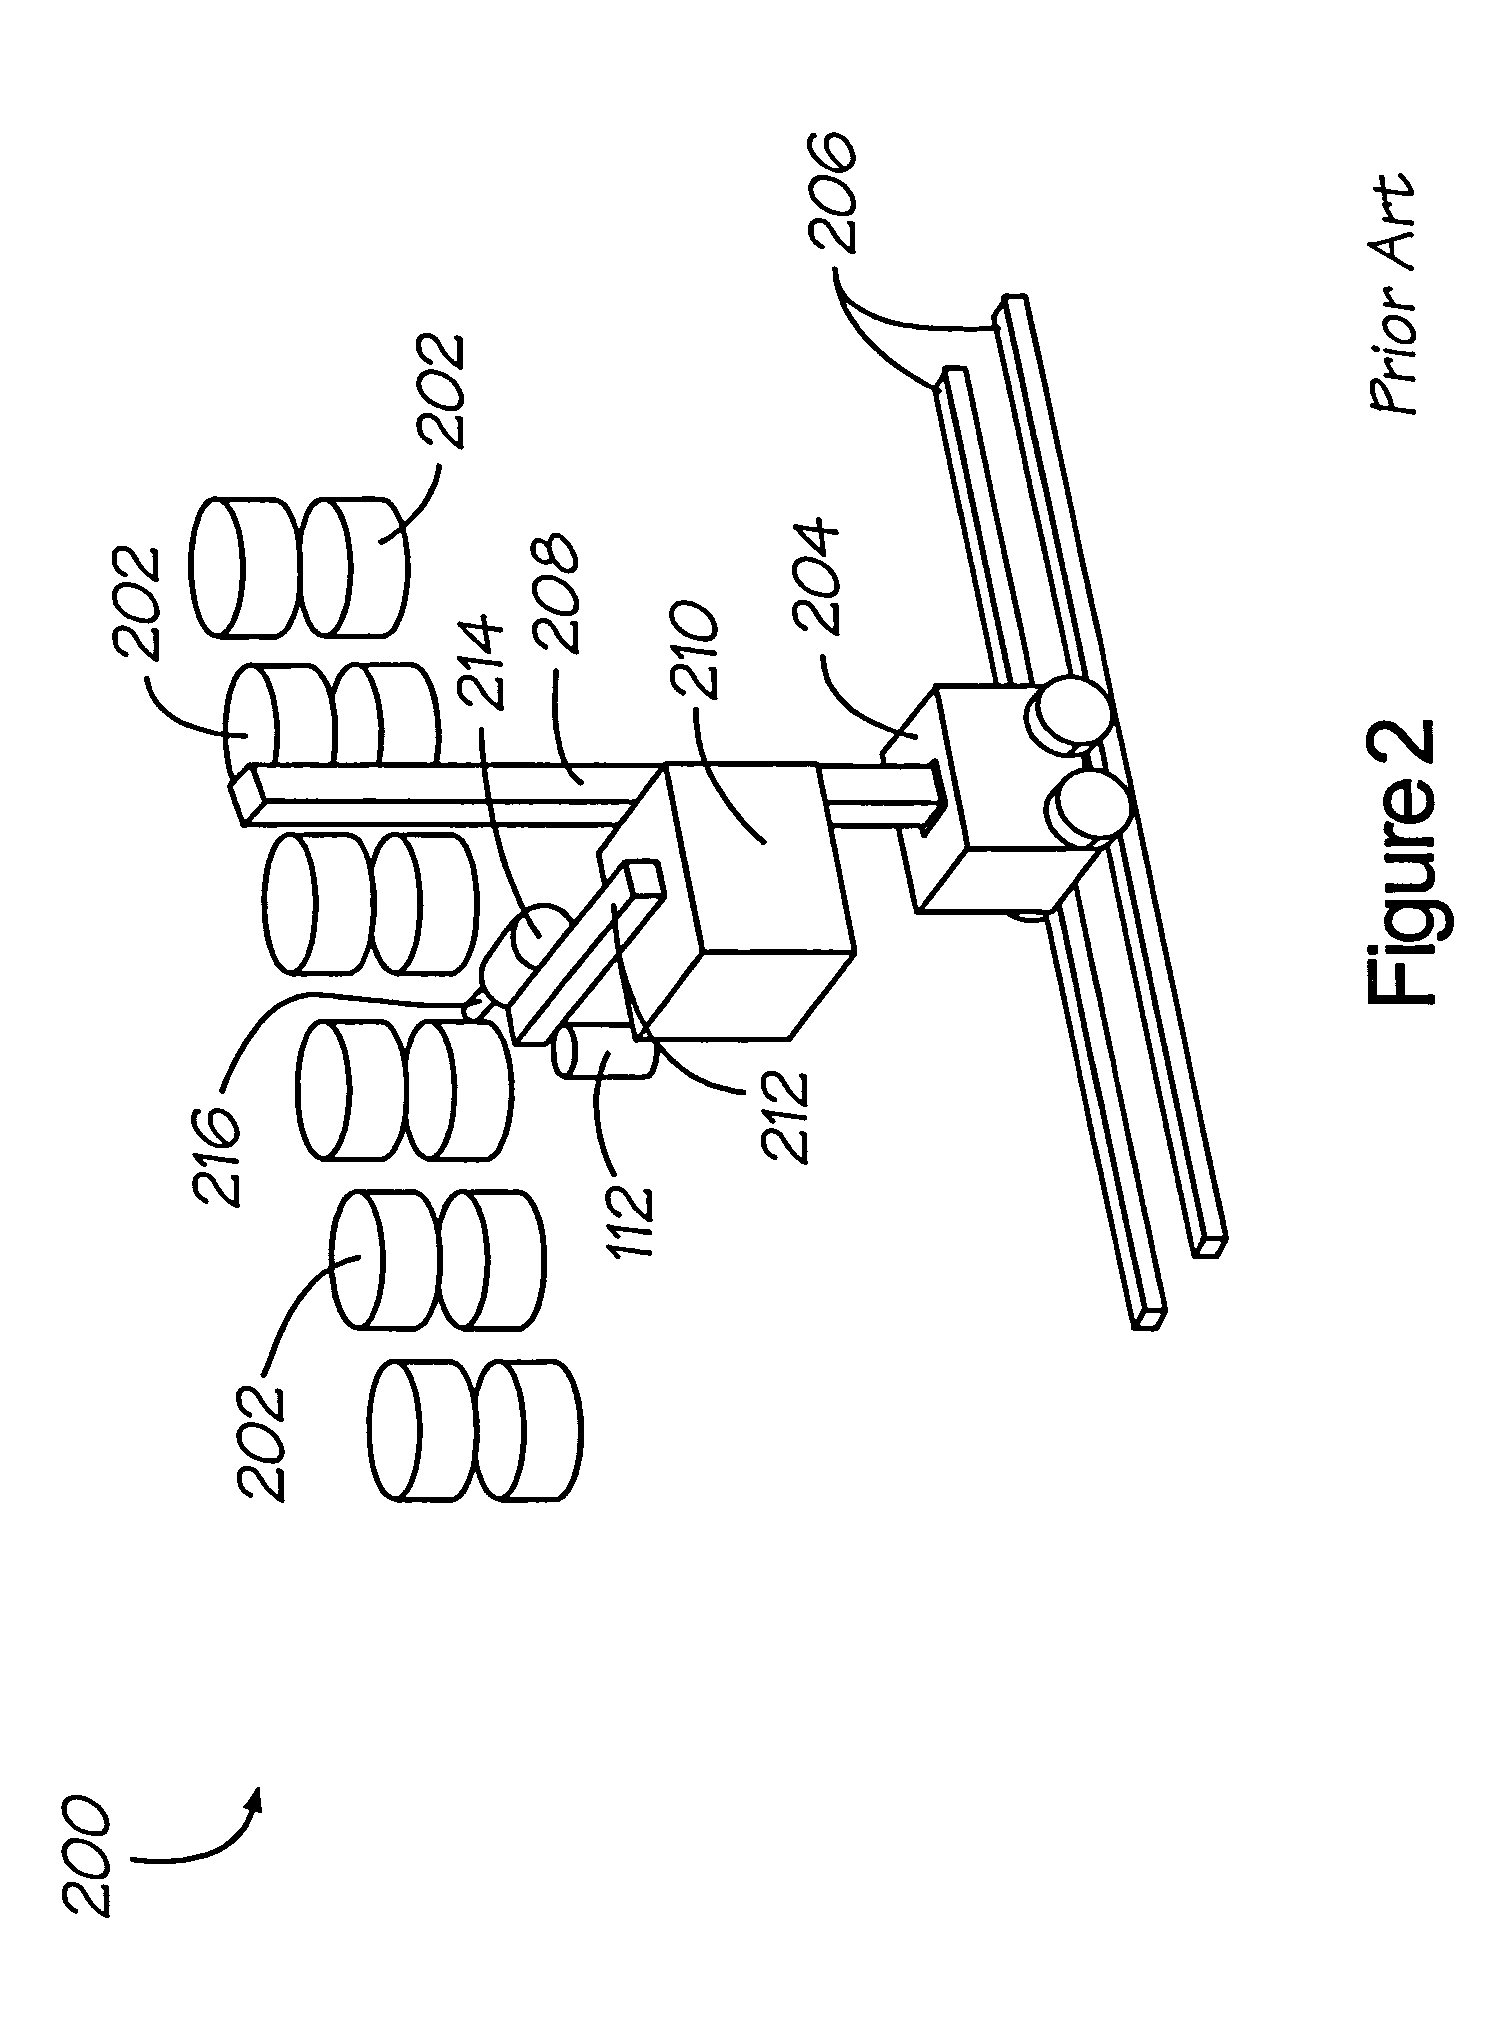 Robotic arm and method for using with an automatic pharmaceutical dispenser